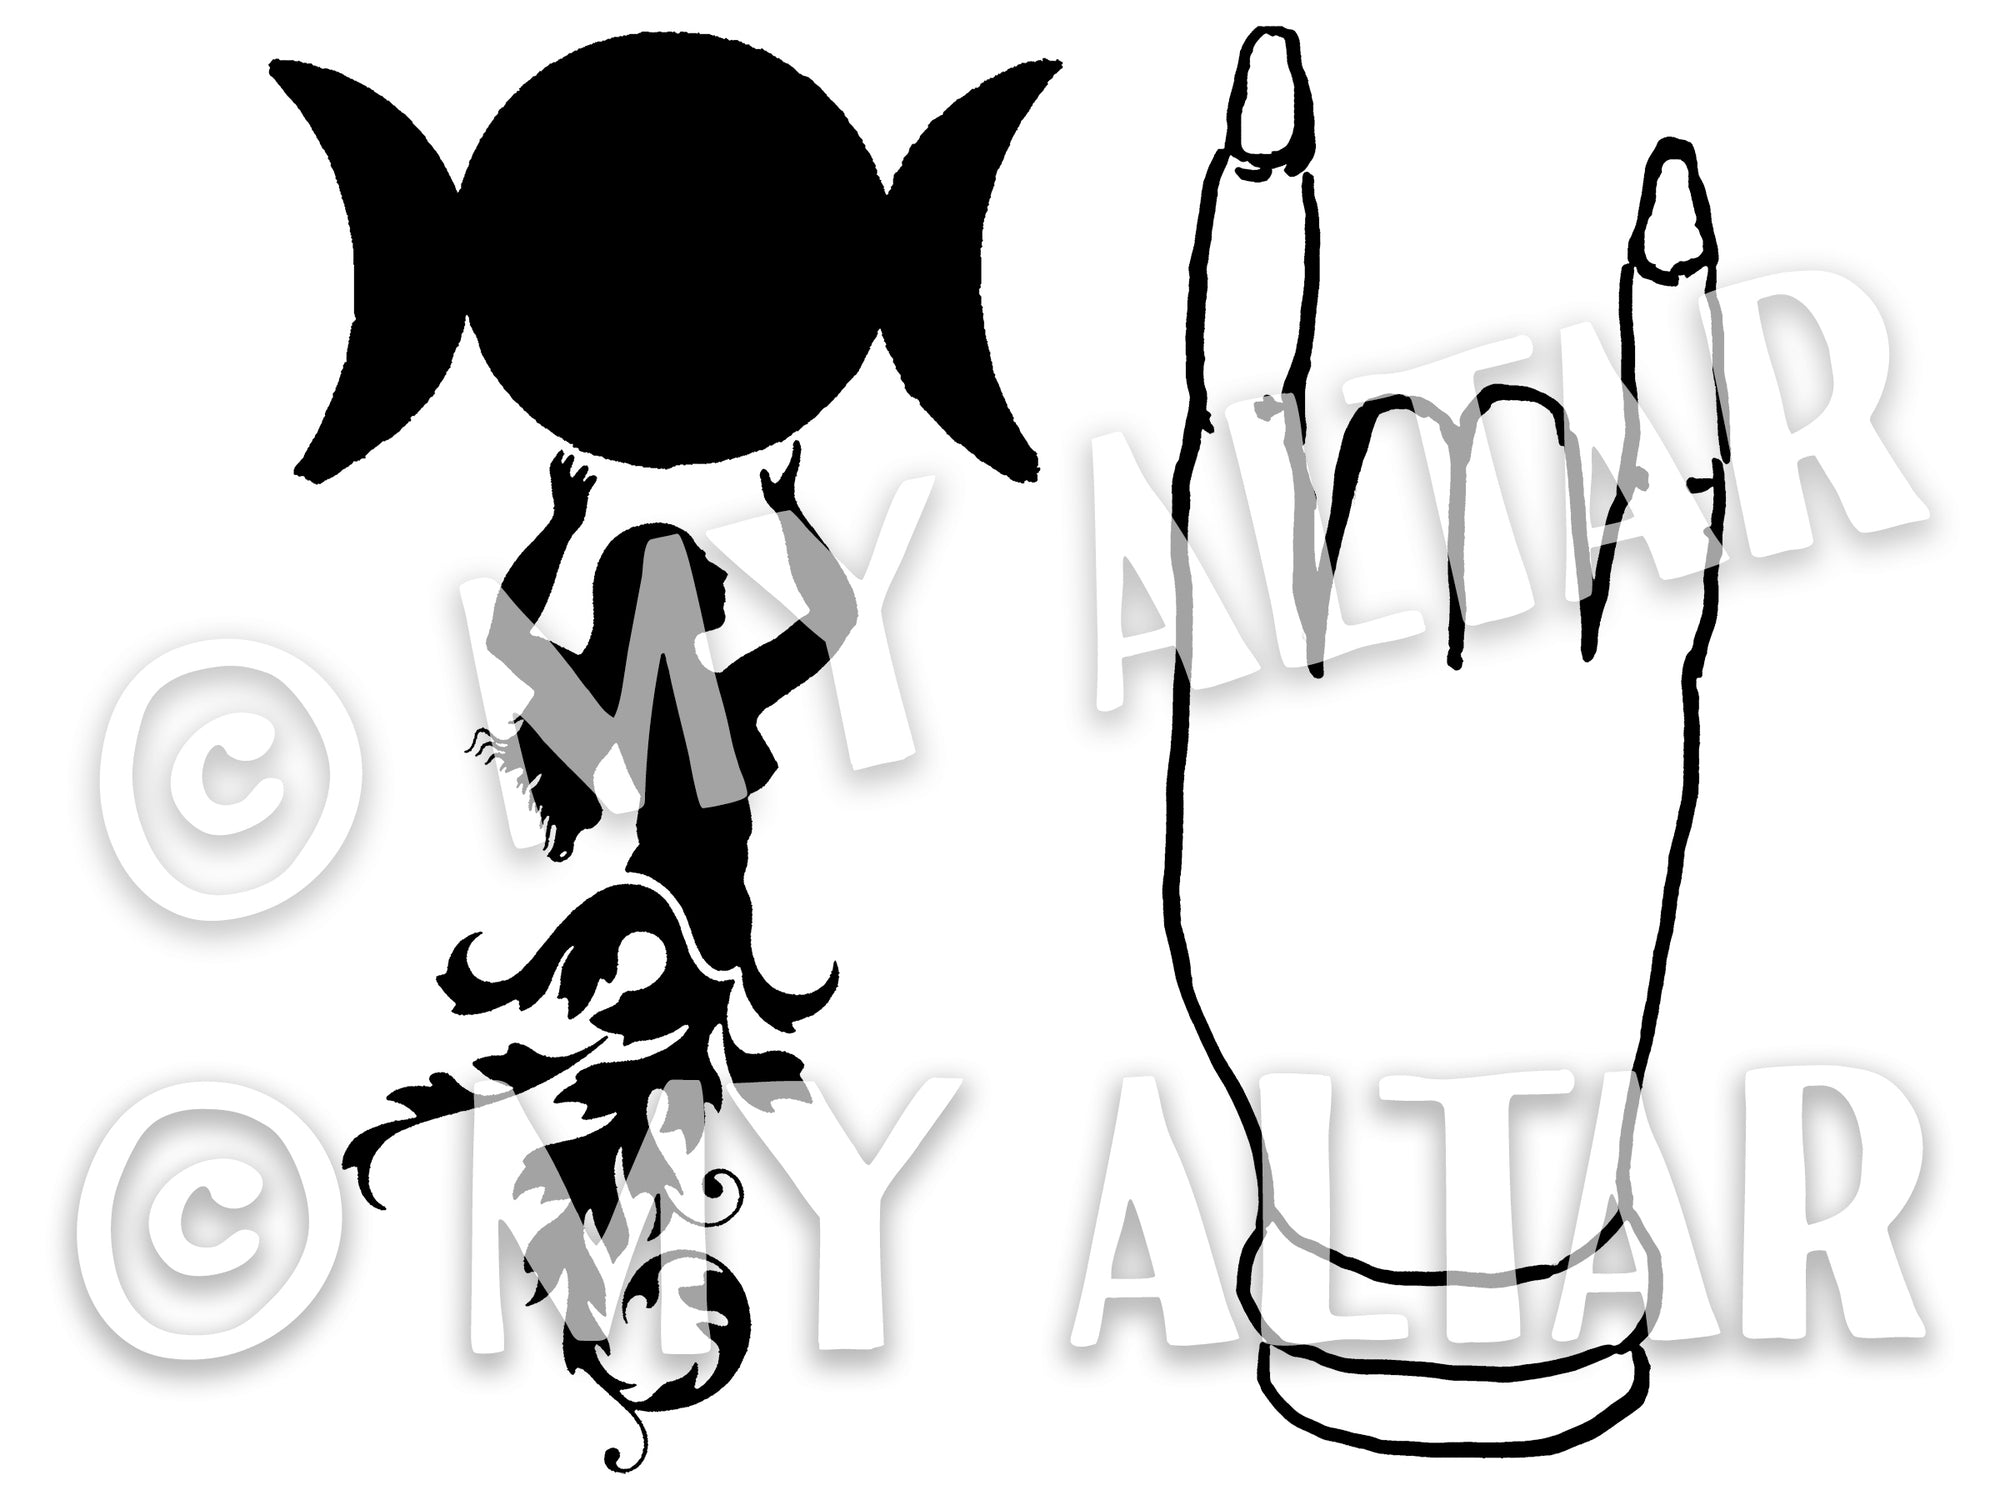 Set of 2 Large 5" Triple Moon Goddess and Mano Cornuto Witchcraft Protection Invocation Sigil Waterproof Temporary Tattoos